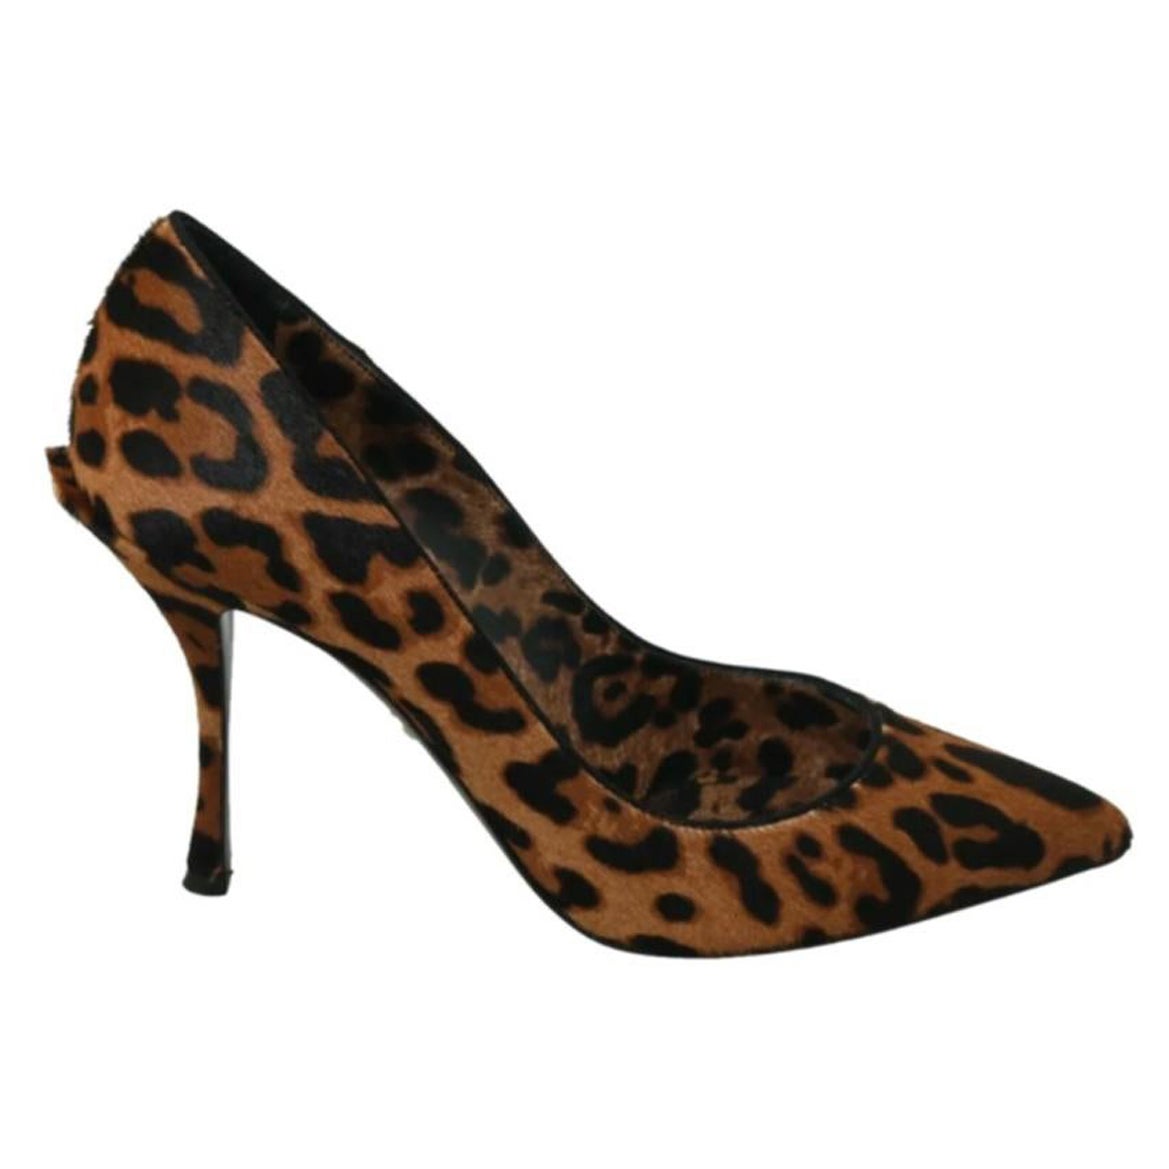 Dolce & Gabbana Brown Leopard High Heels Pumps Shoes Pony Hair Leather For Sale